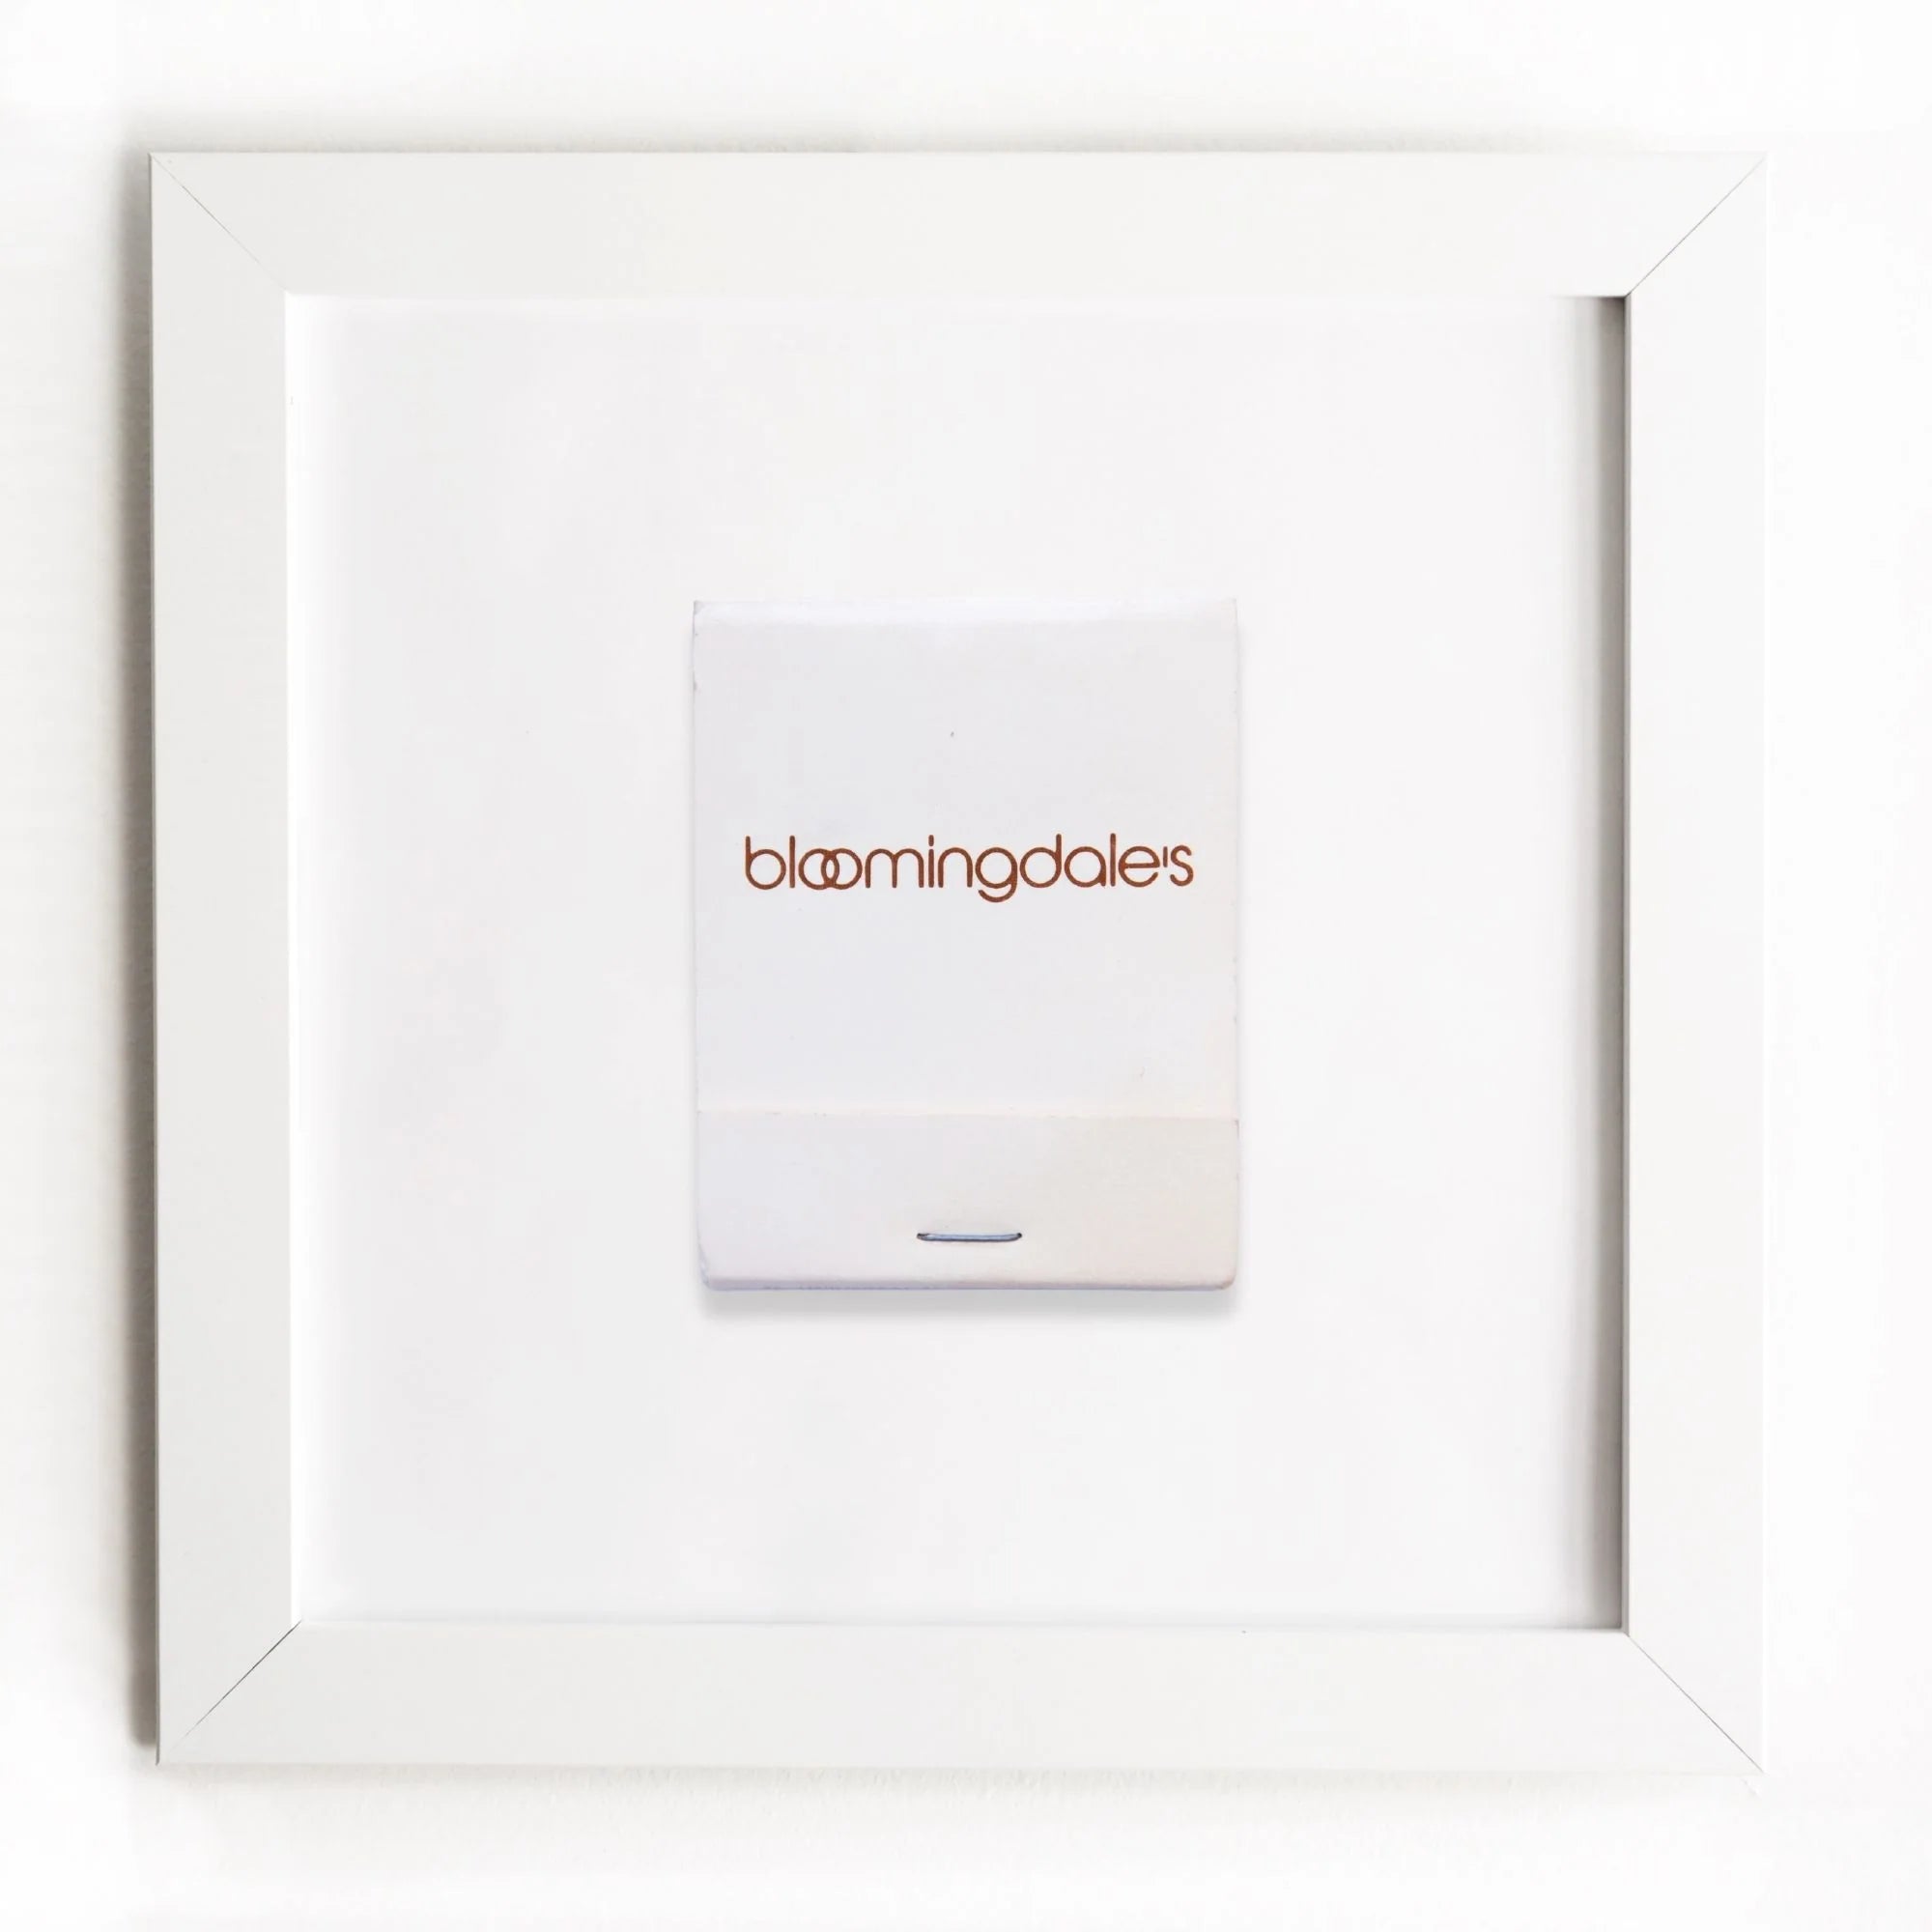 A Match South Art Square White Frame, predominantly white with the store's logo printed in lowercase, is centered within a simple, square white frame on a plain white background, evoking a minimalist bungalow style.